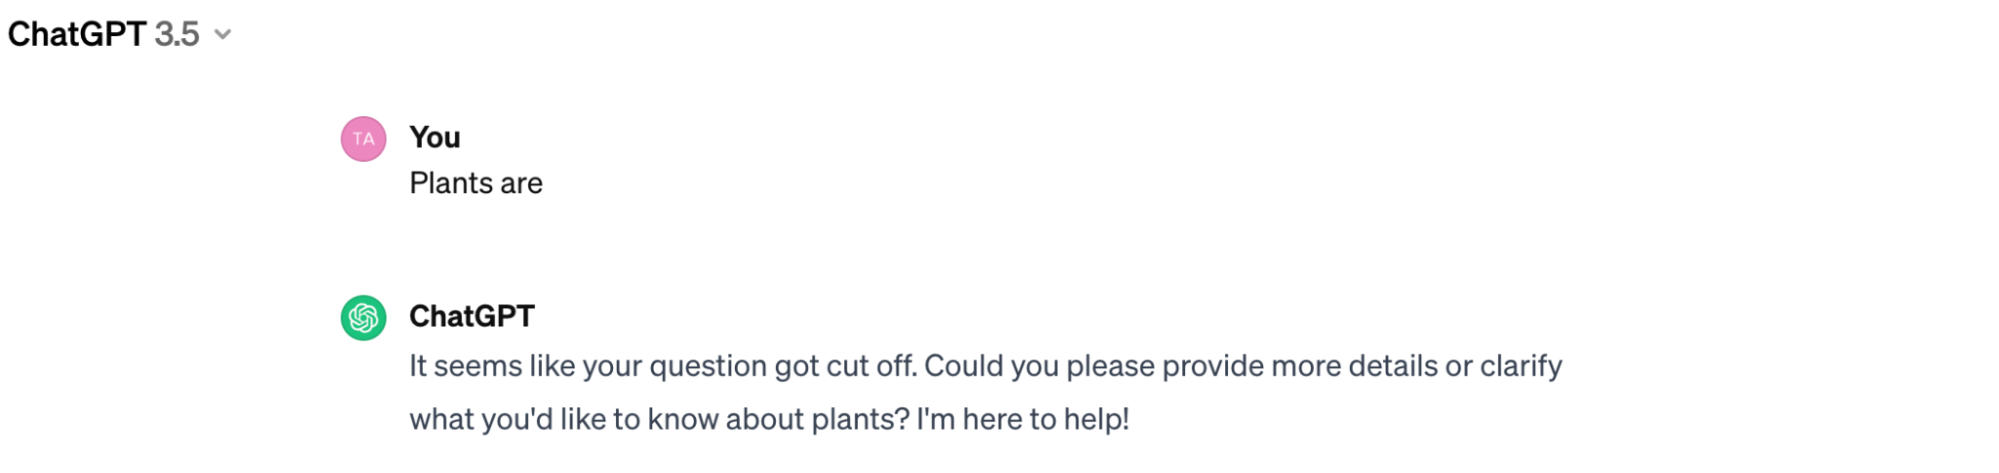 prompt-engineering-chatgpt-plants-are.png